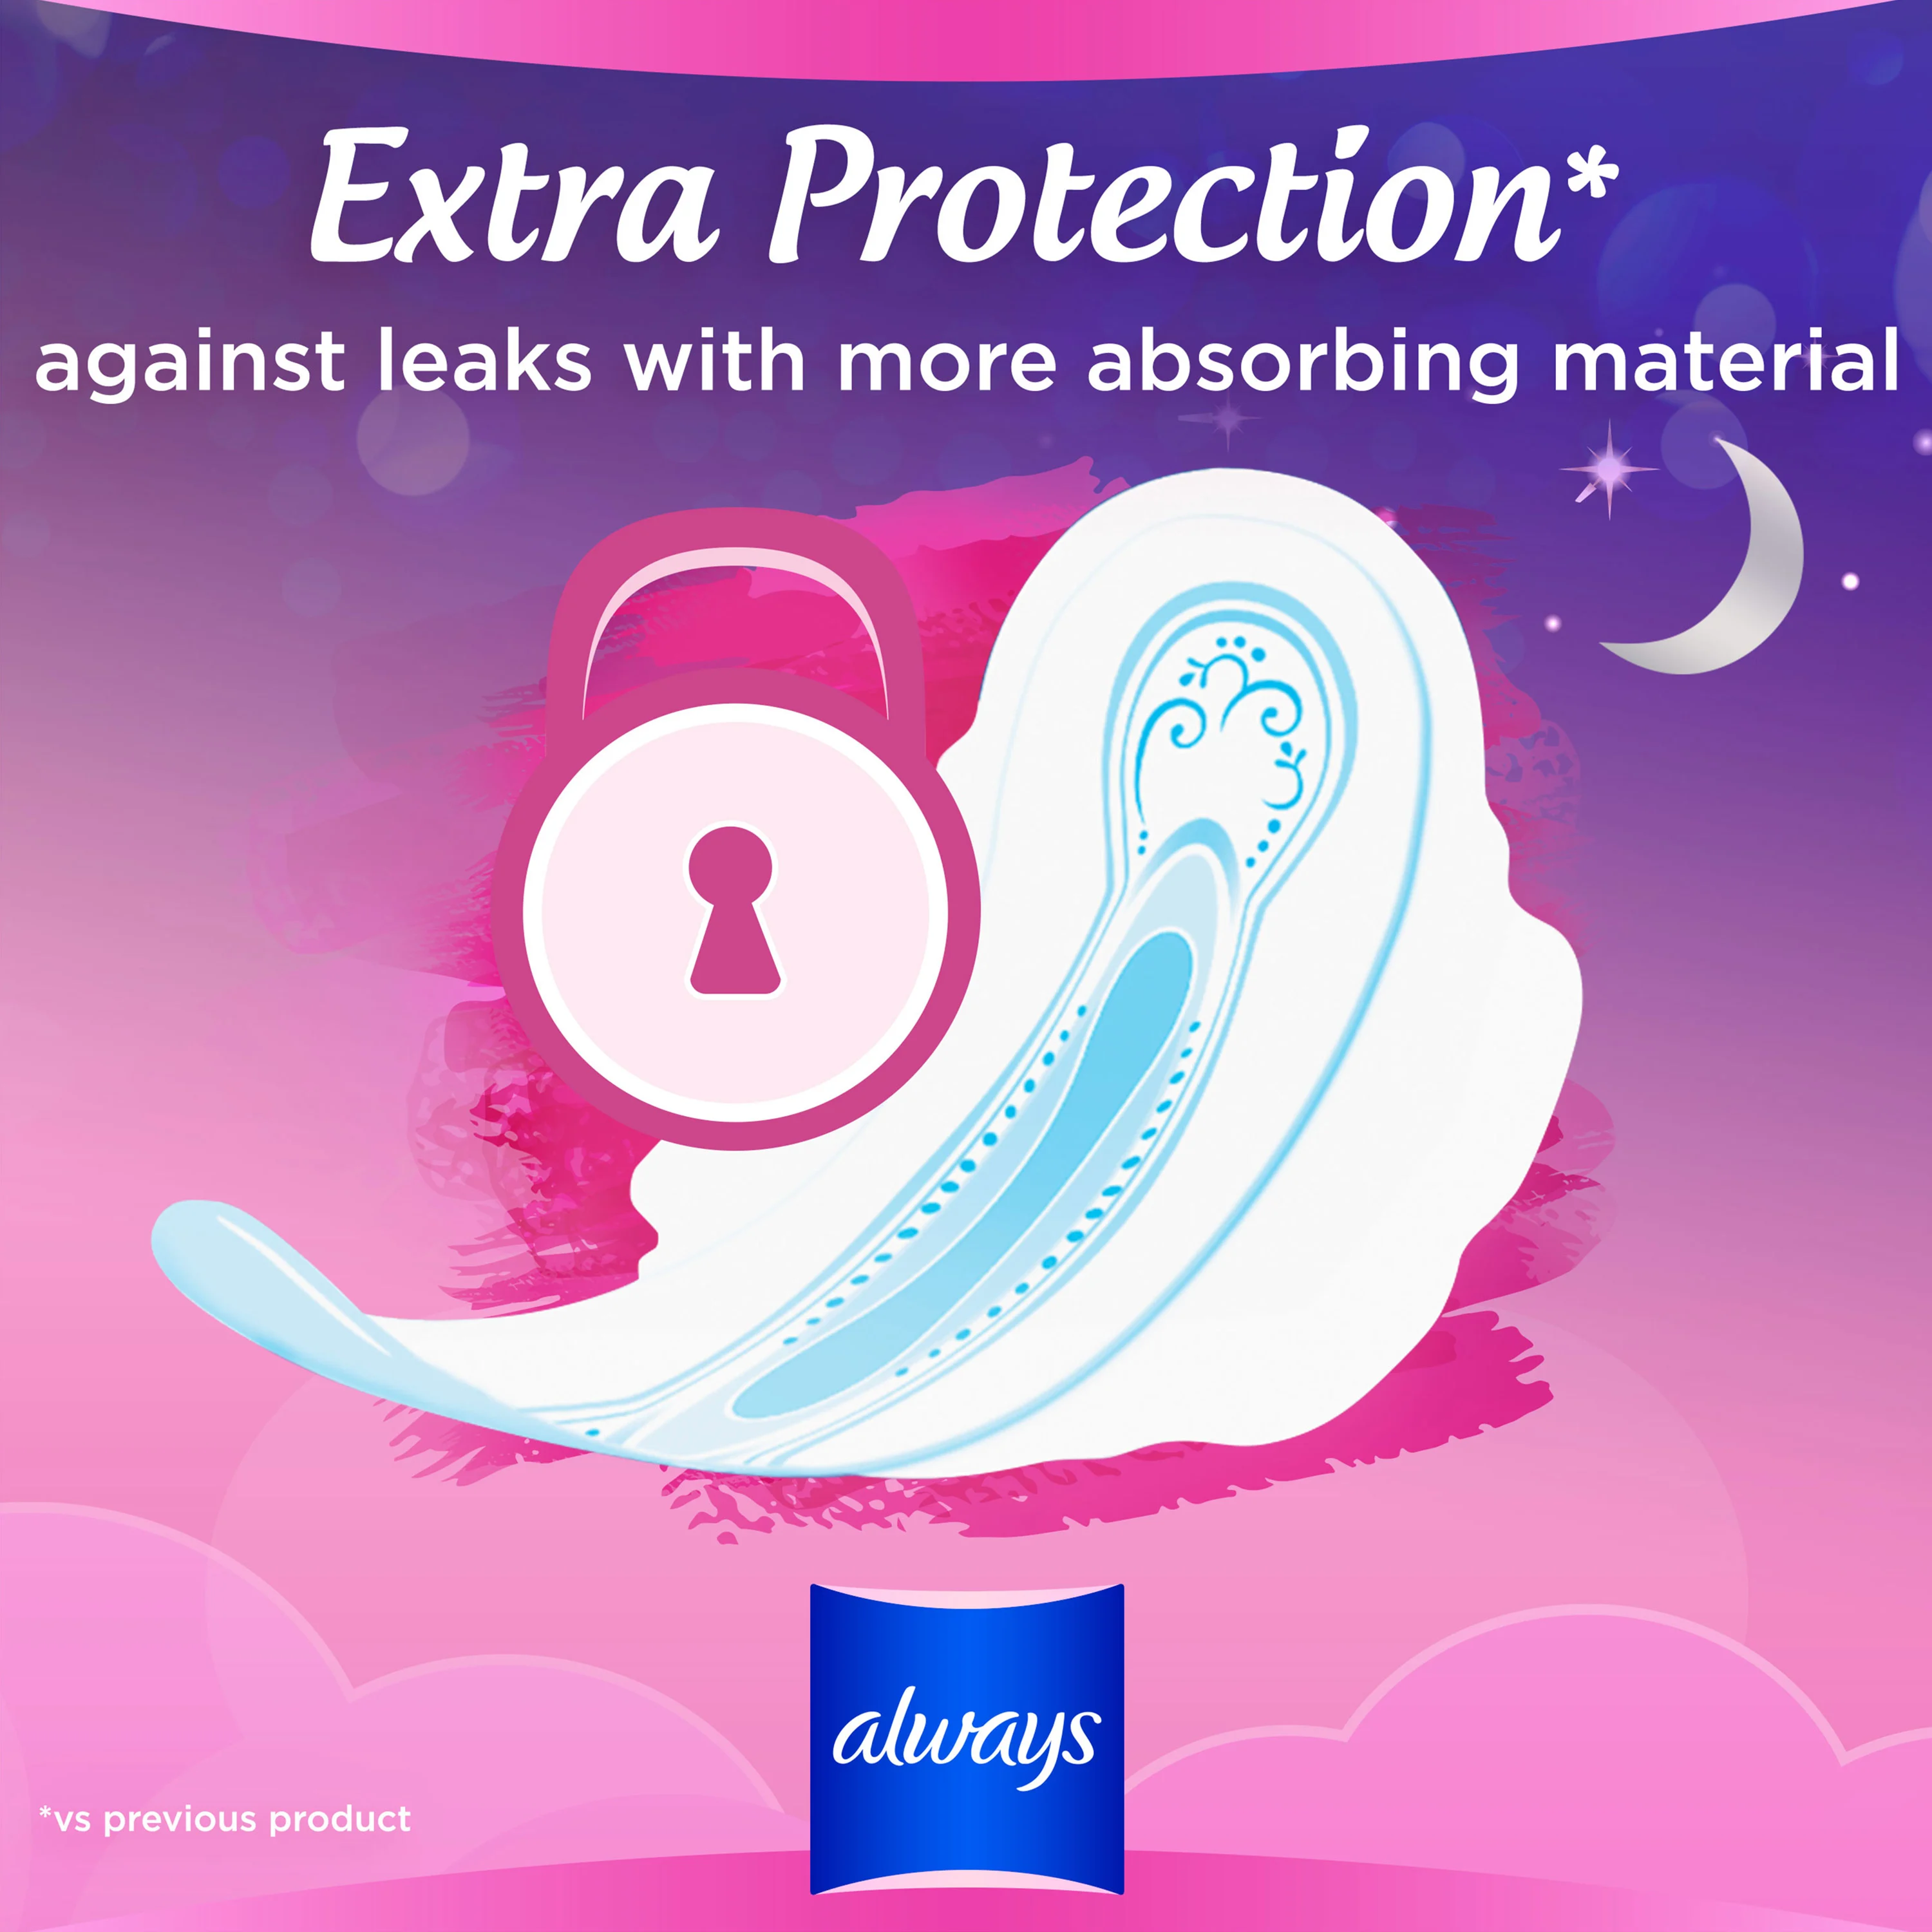 Extra Protection against leaks with more absorbing material in Always Sensitive sanitary pads